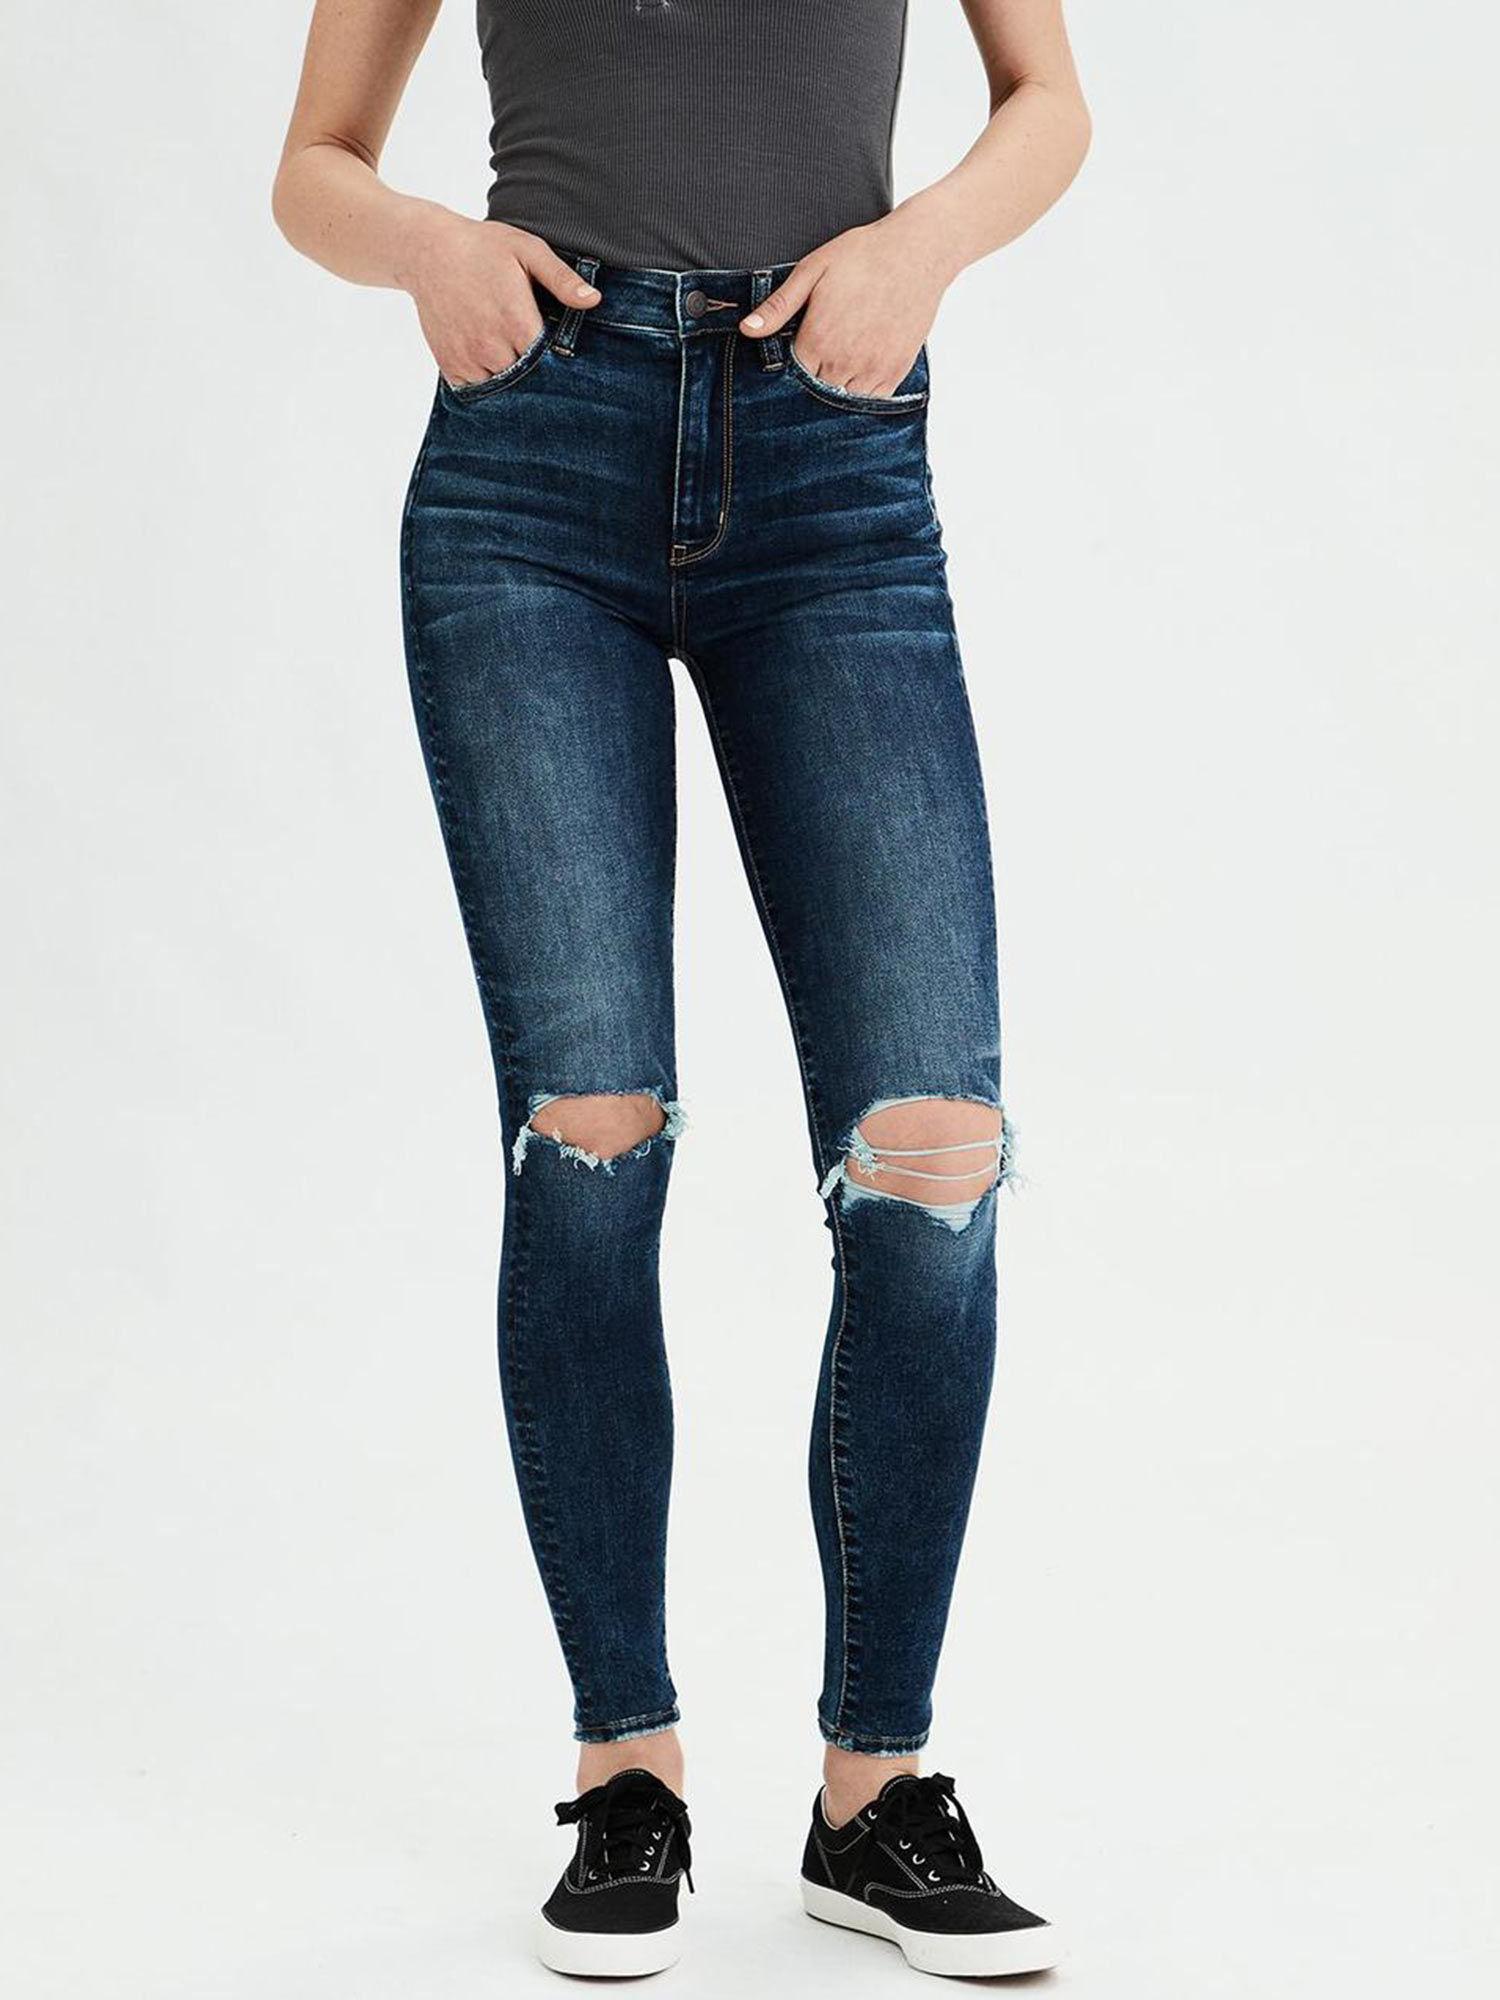 outfitters blue solid jegging